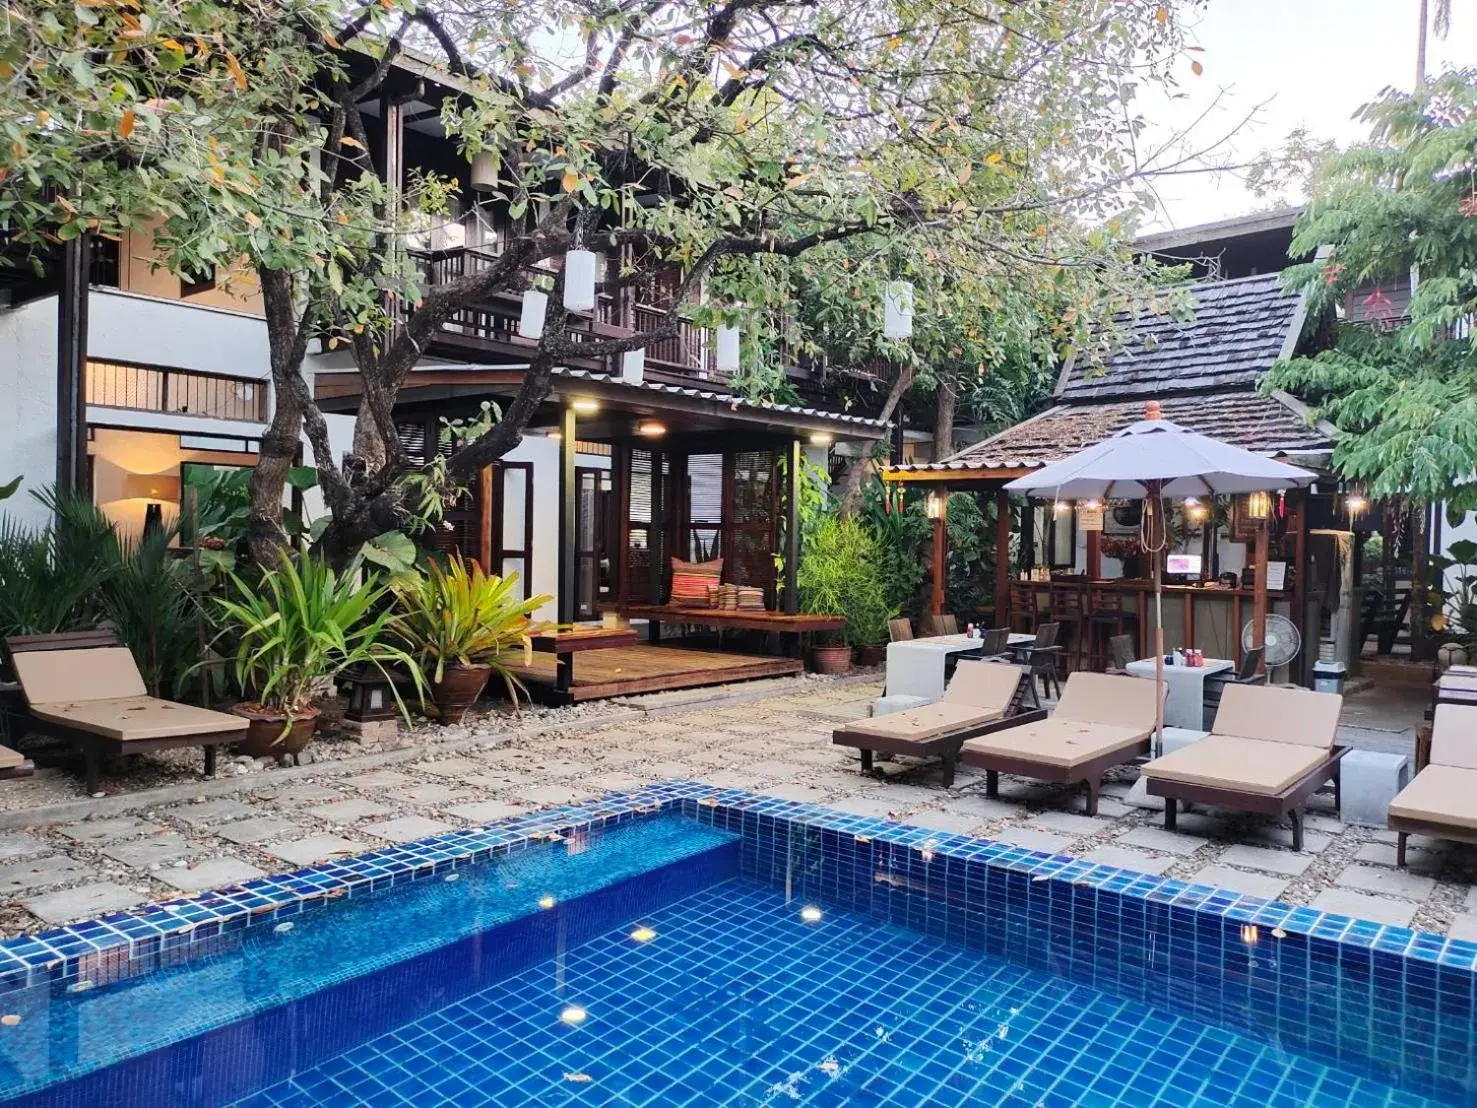 Property building, Swimming Pool in Banthai Village Hotel